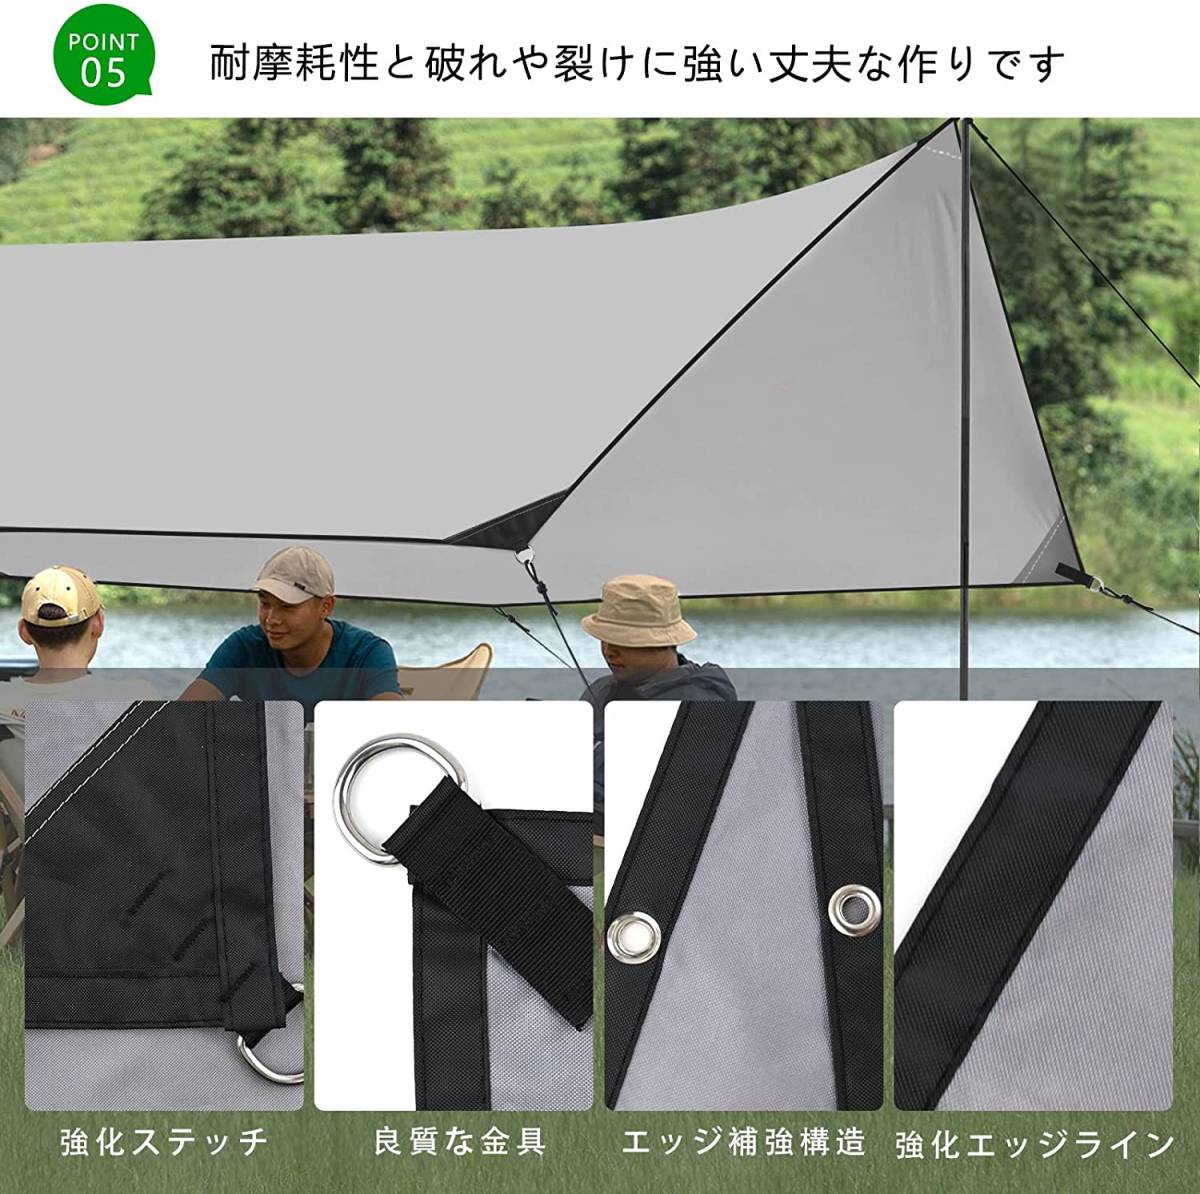 OUTDOORMASTER 防水タープ テント 通販